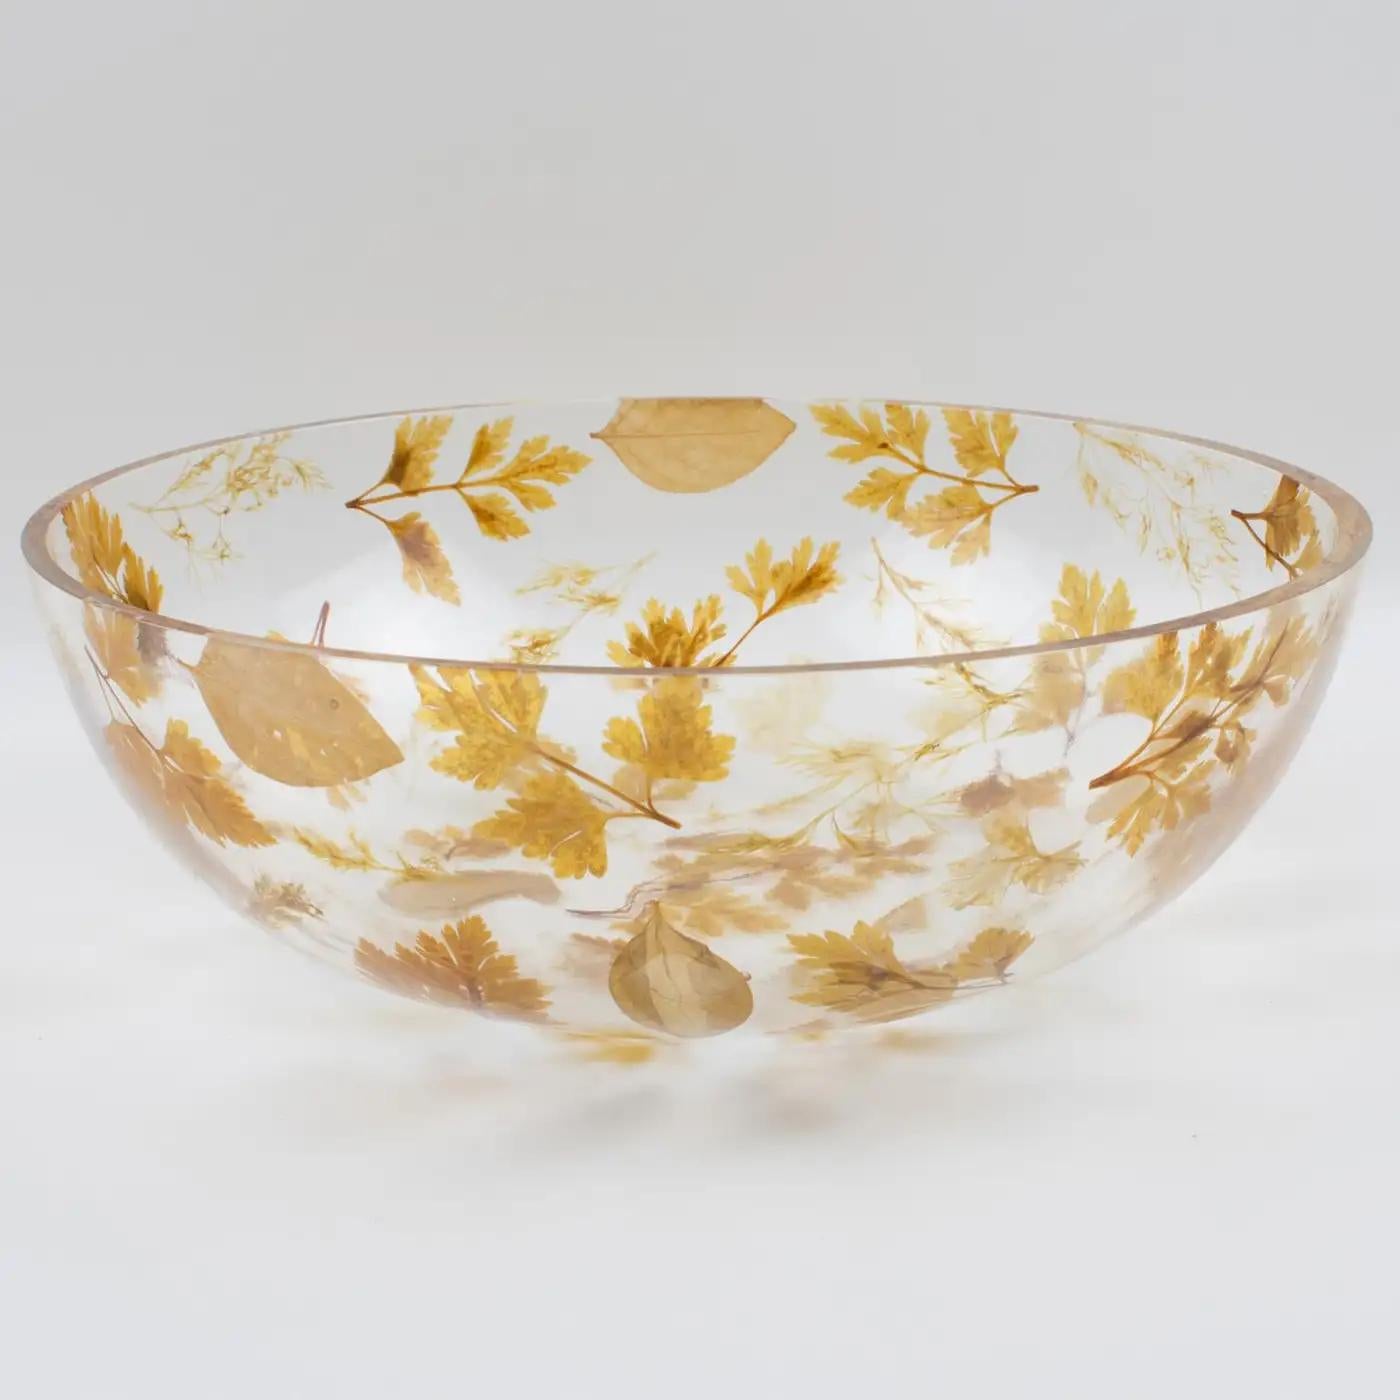 Italian Resin Centerpiece Serving Bowl with Leaves Inclusions, Italy 1970s For Sale